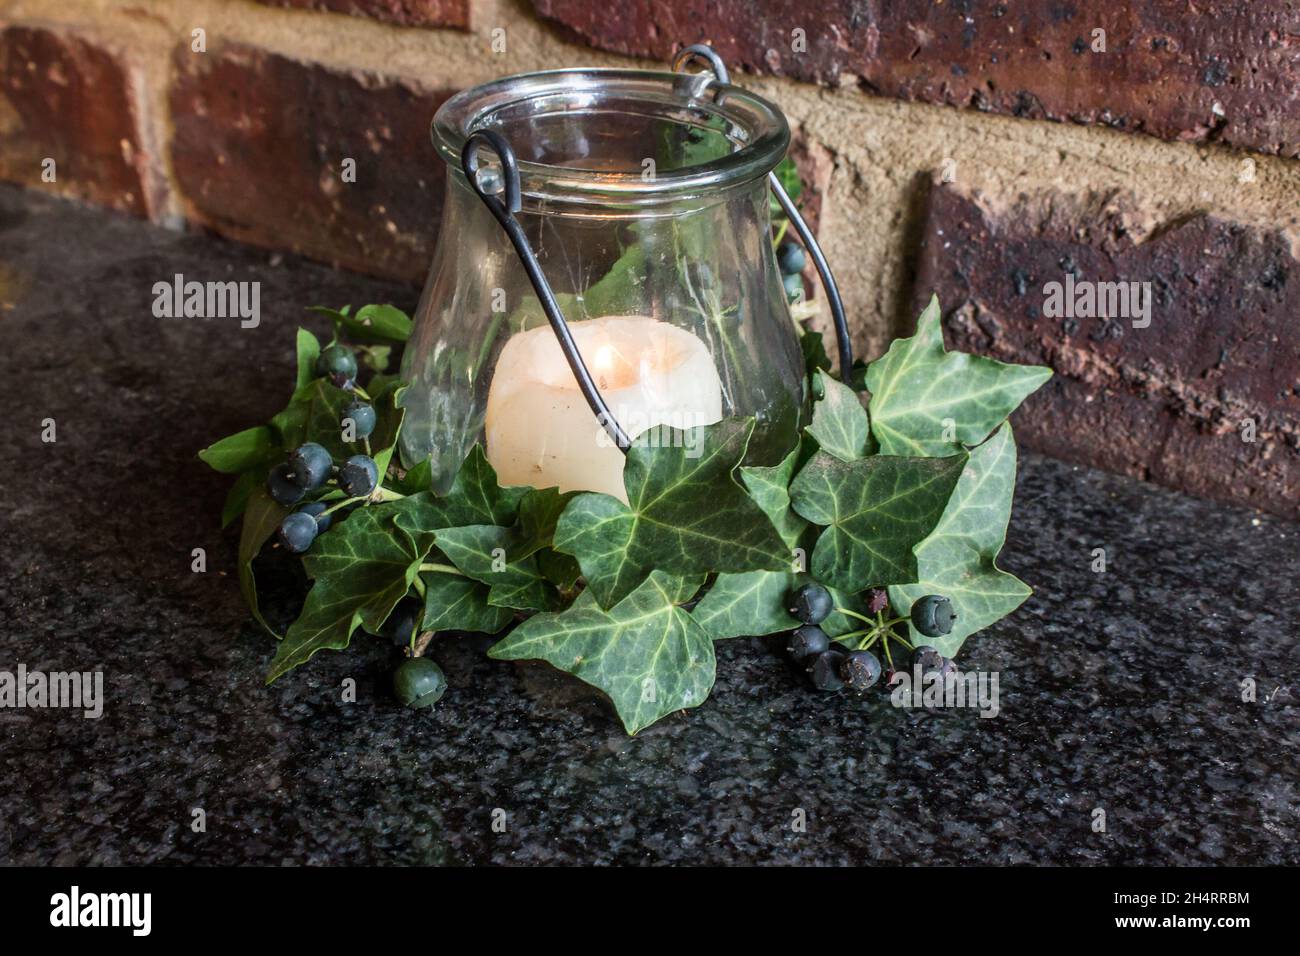 Still-life consisting of a lit candle, surrounded by dark green Ivy leaves and berries, with a rustic brick background. Stock Photo